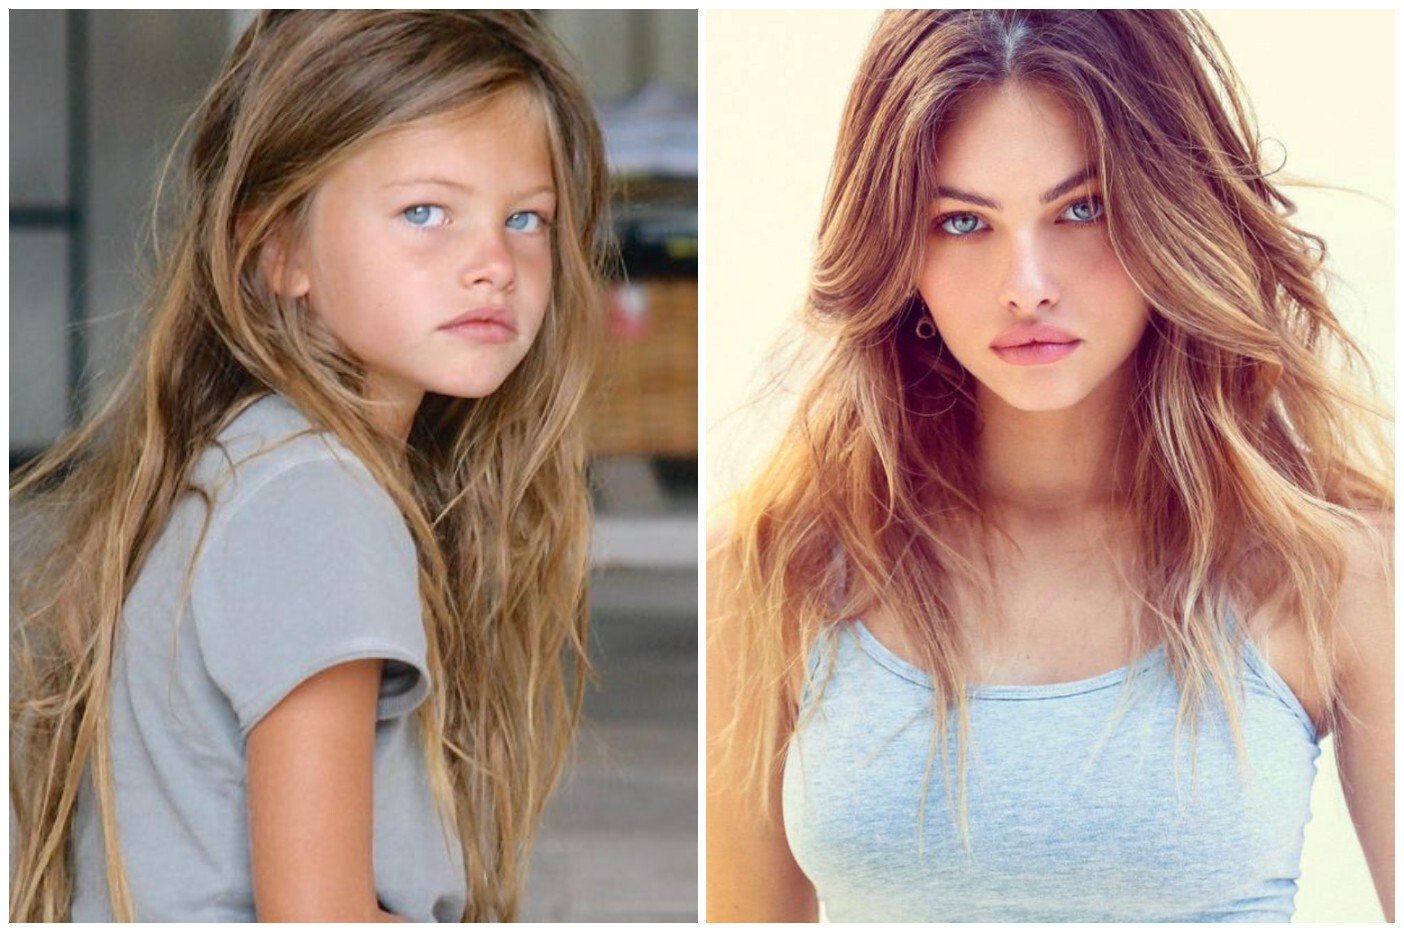 Meet French model Thylane Blondeau, 'the most beautiful girl in the world'  at age six: now 20 years old, she's worked with Zendaya for Dolce & Gabbana  and is pals with Brooklyn